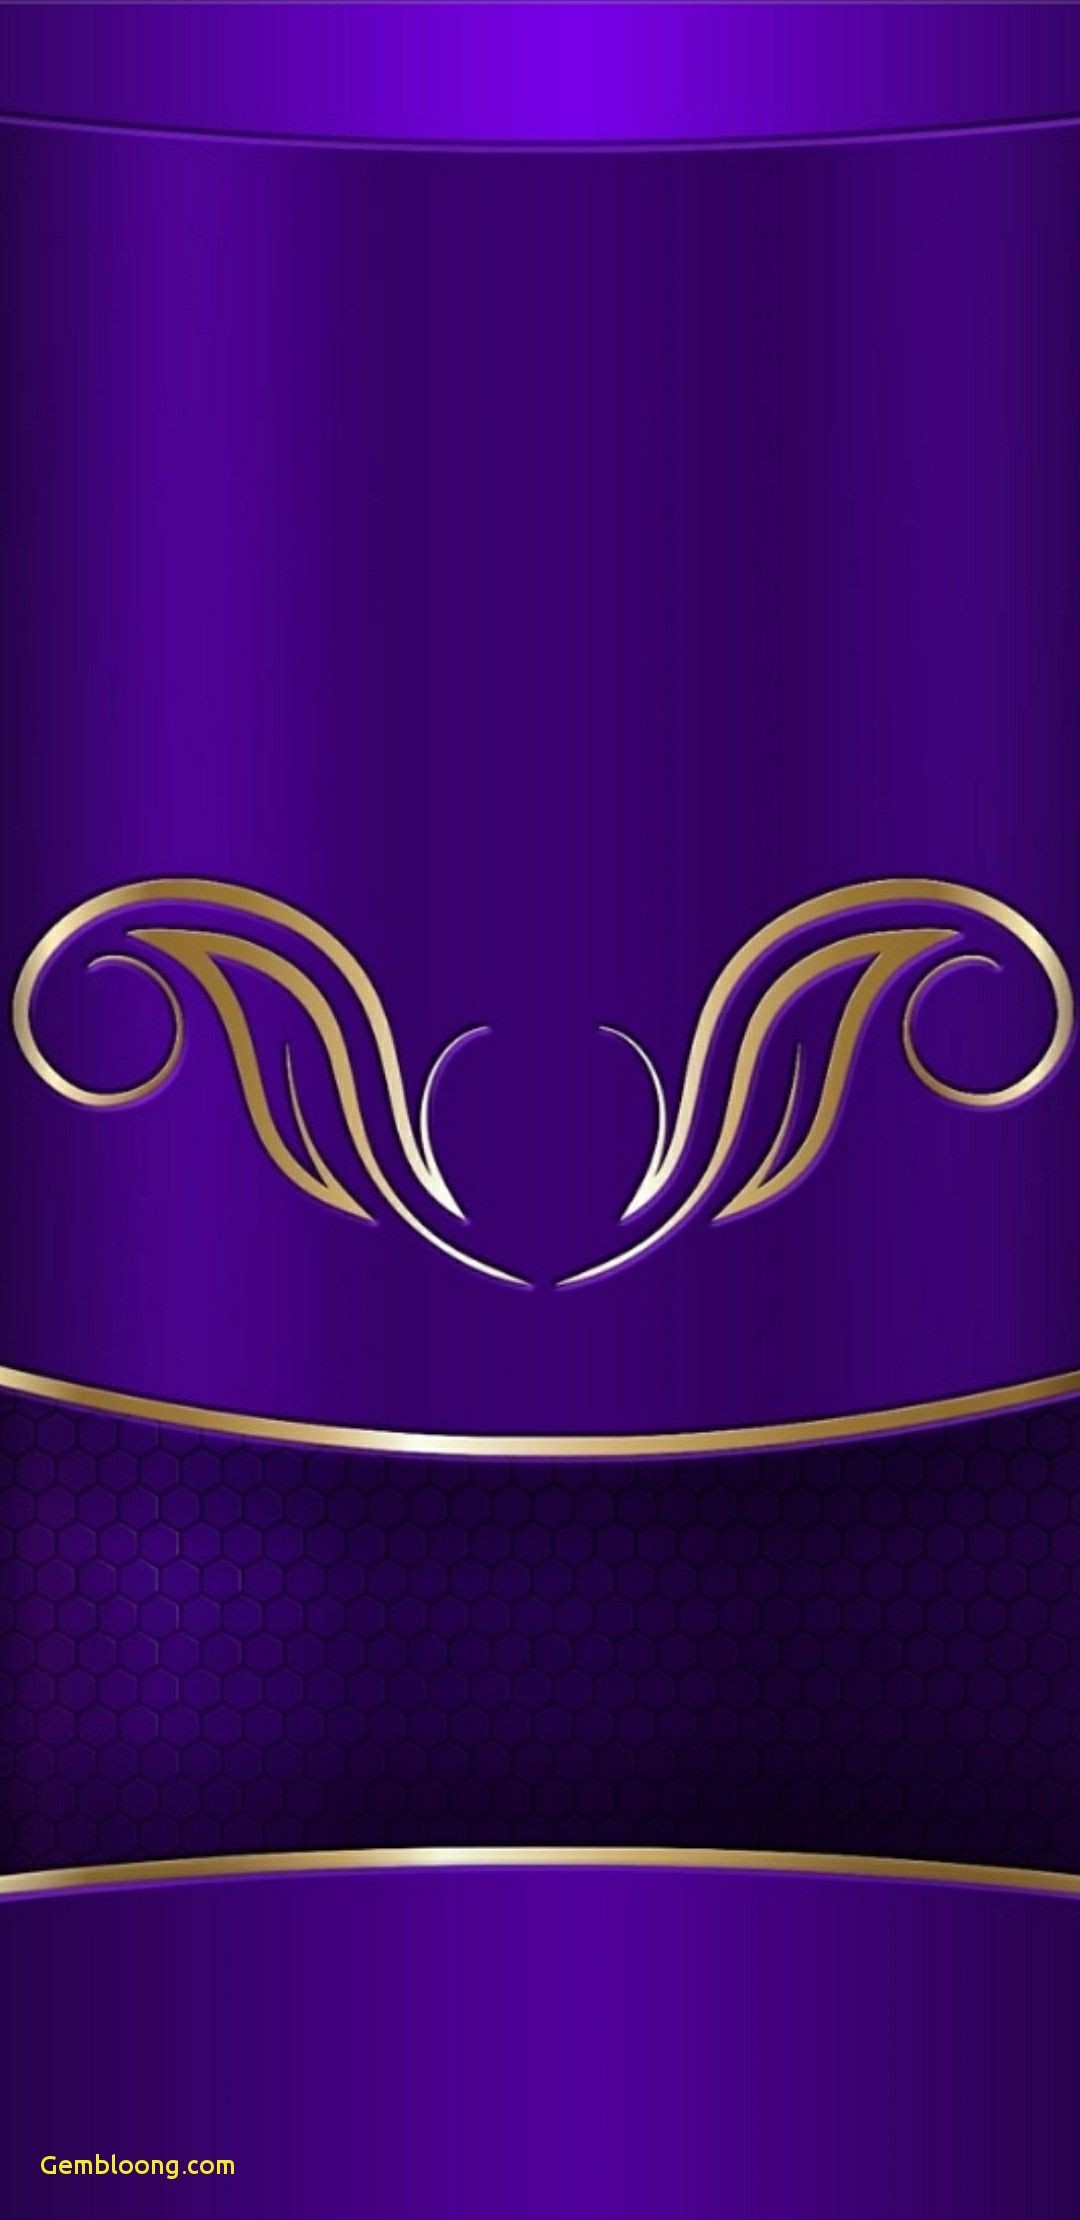 1080x2220, Purple Wallpaper Beautiful Gowns Samsung - Background Purple And Gold - HD Wallpaper 